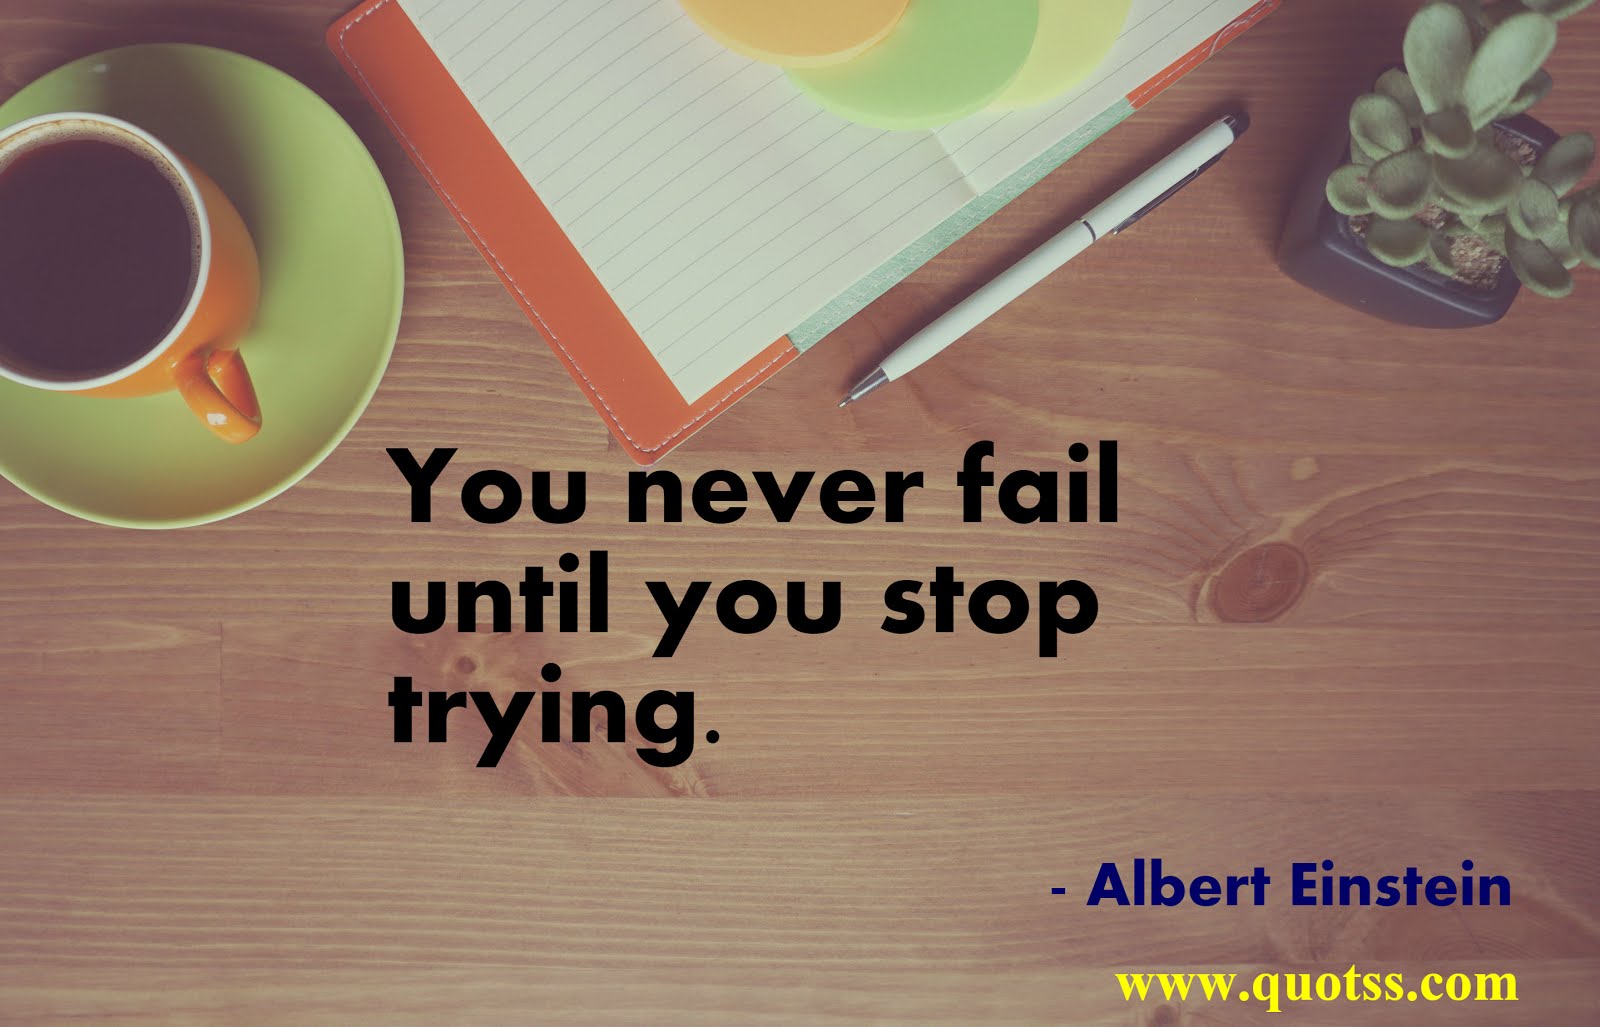 Image Quote on Quotss - You never fail until you stop trying. by